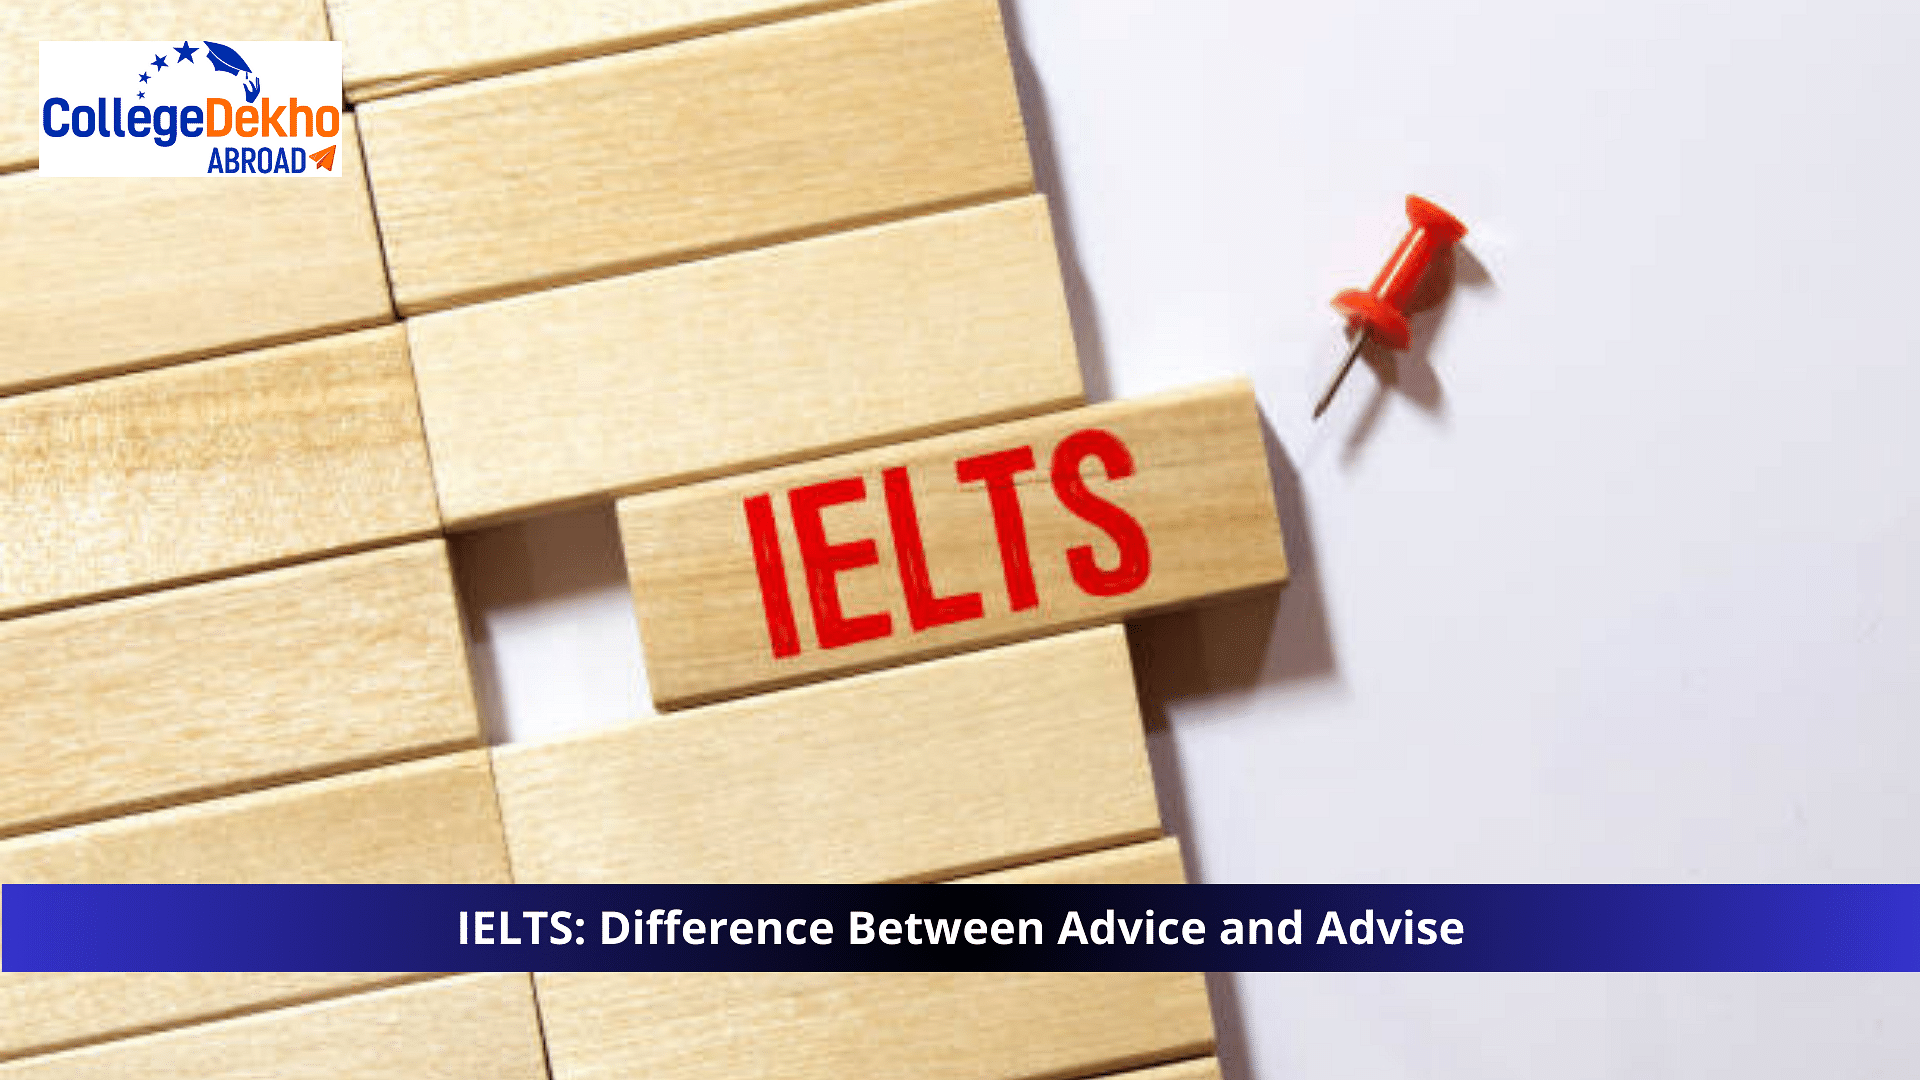 IELTS: Difference Between Advice and Advise